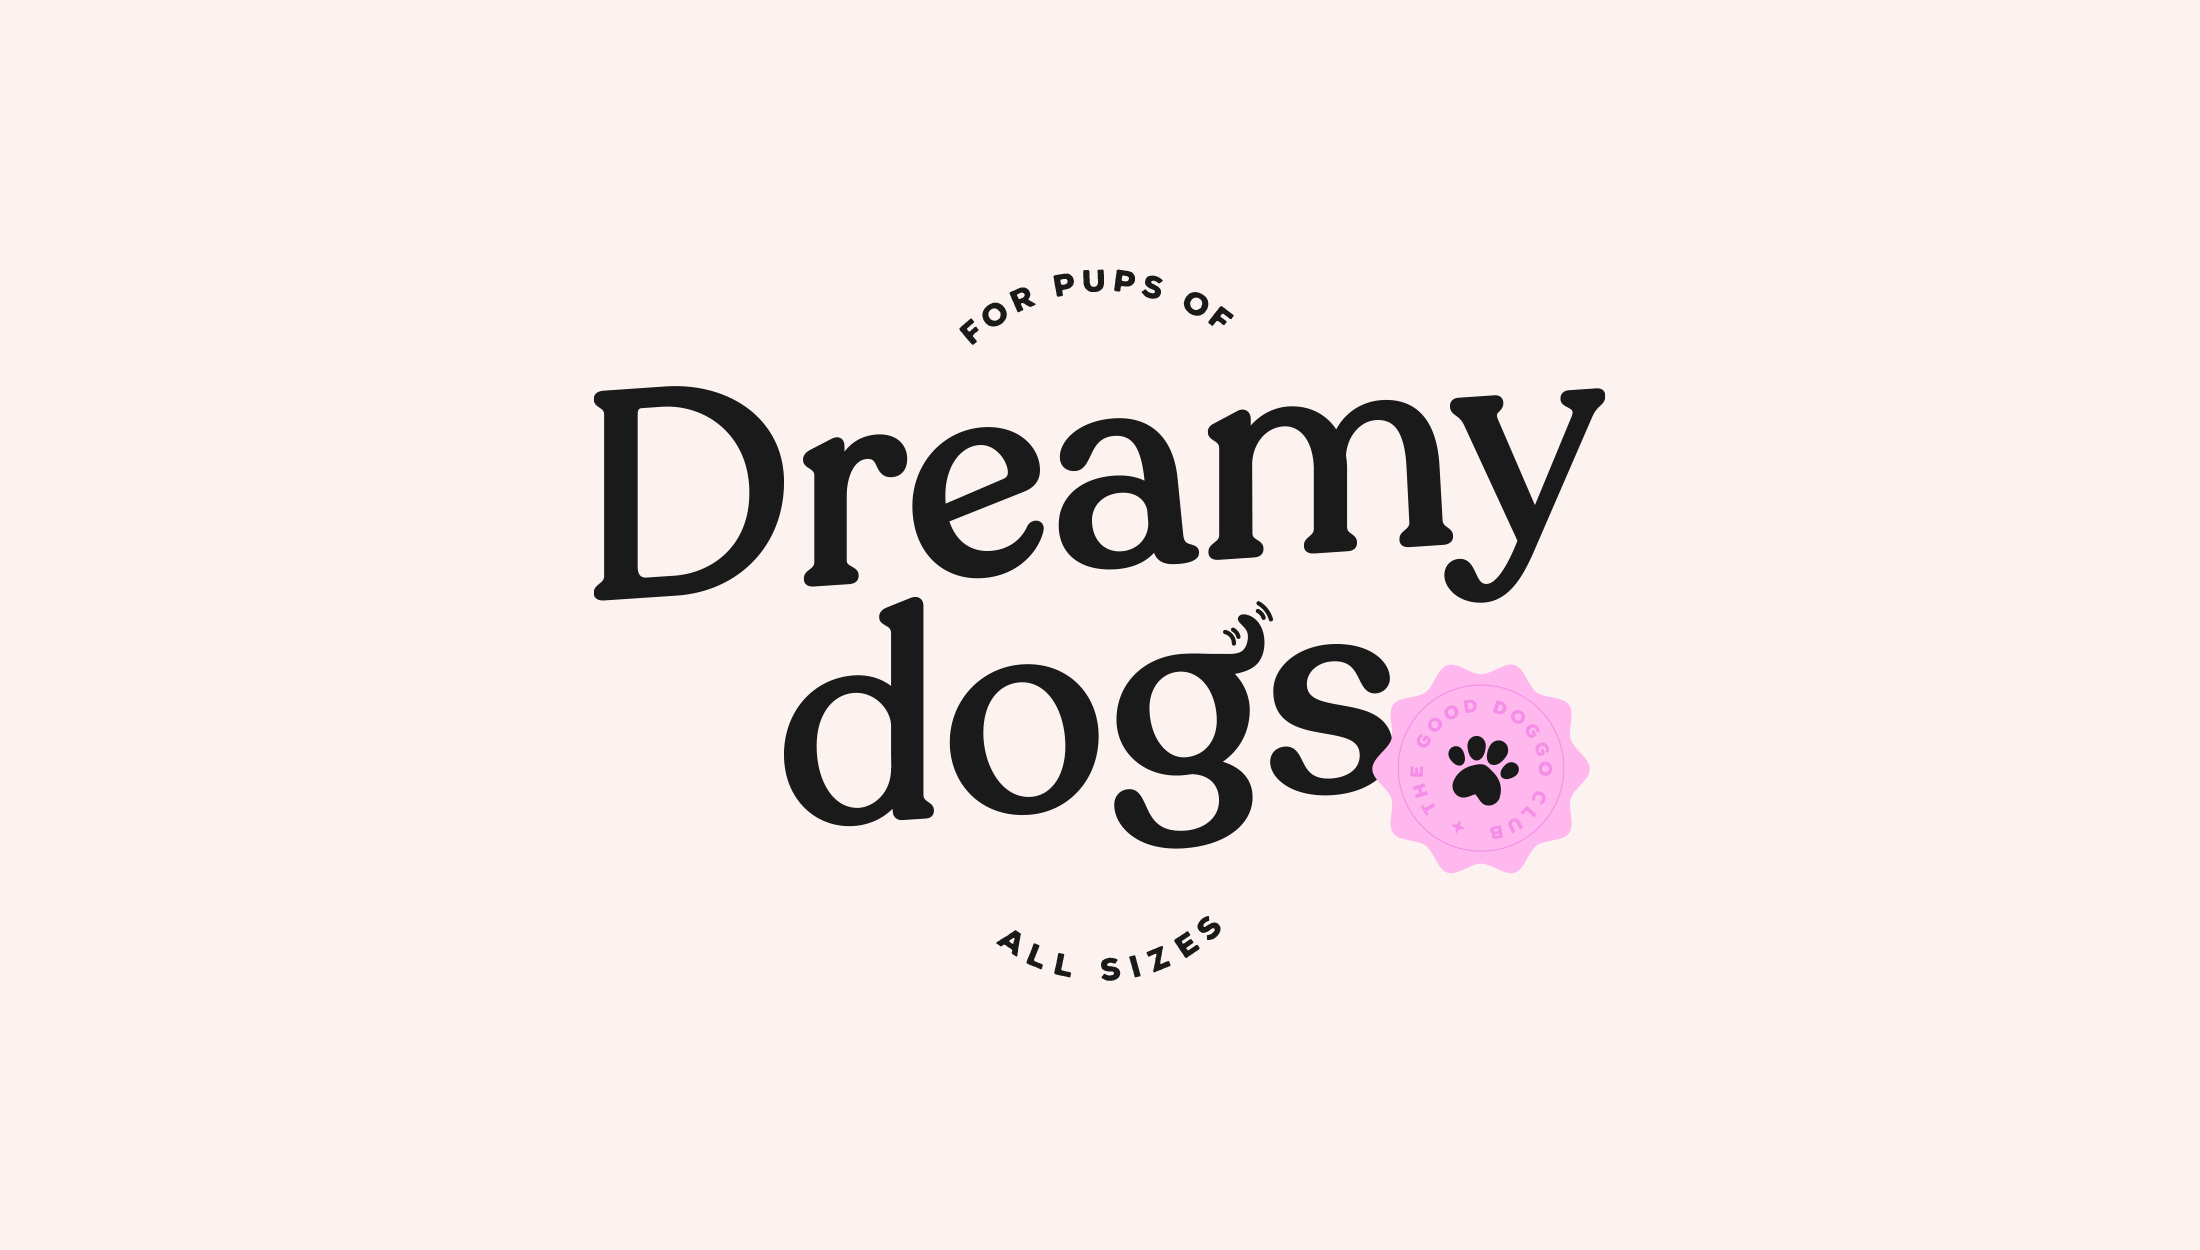 Logo design for Dreamy Dogs, for pups of all shapes and sizes - designed by Wiltshire-based graphic designer